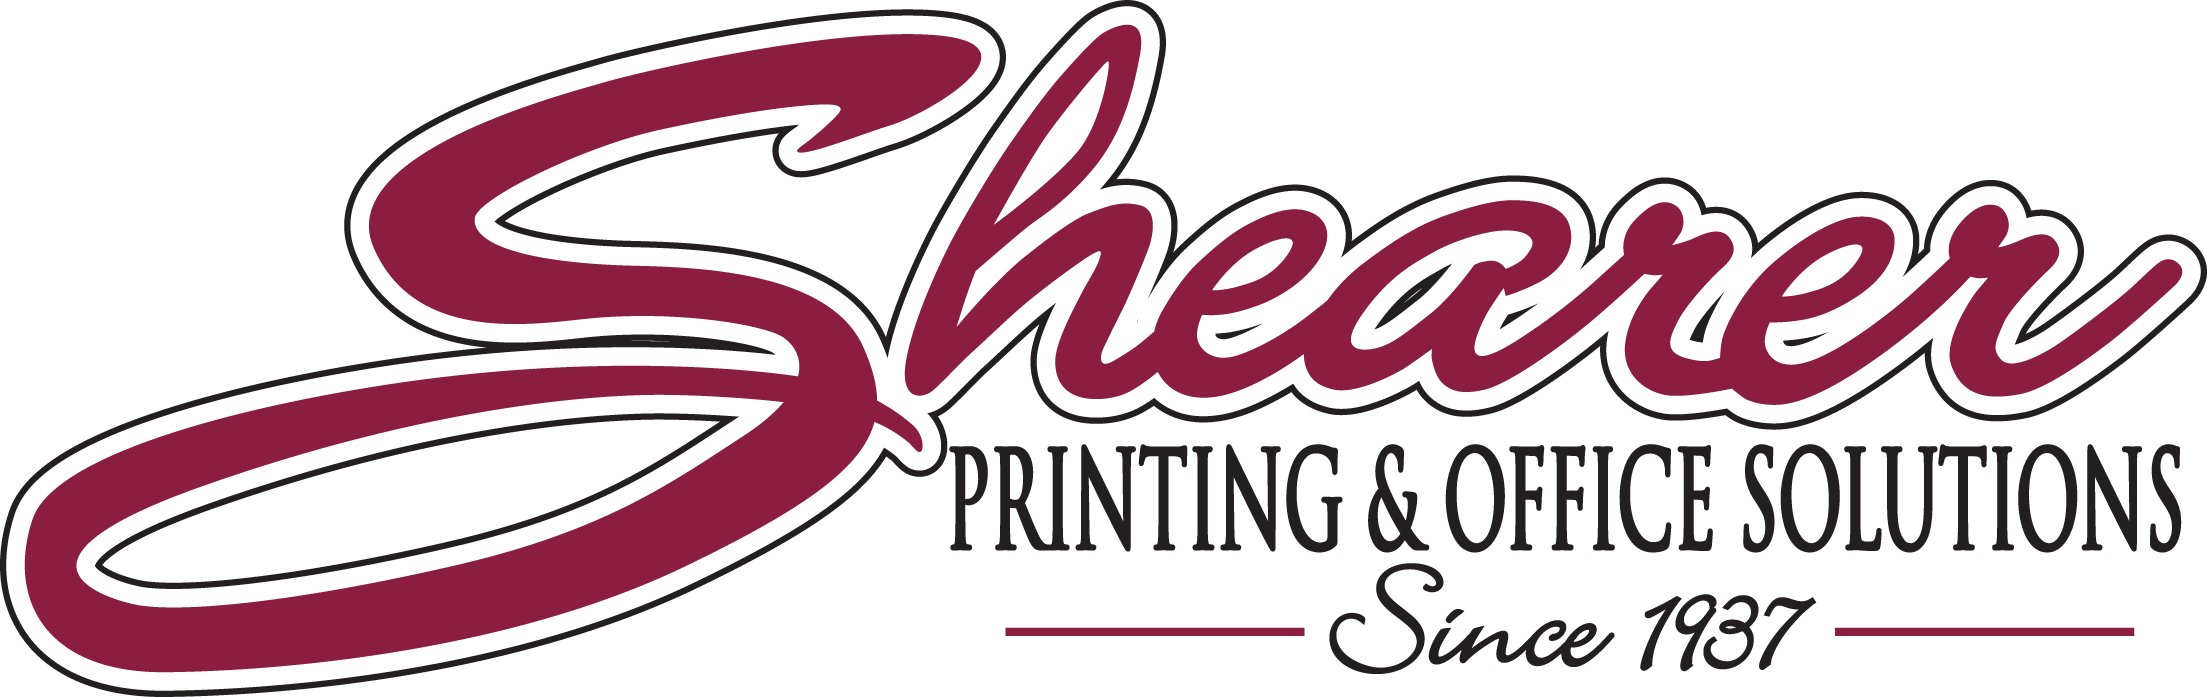 Shearer Printing &amp; Office Solutions